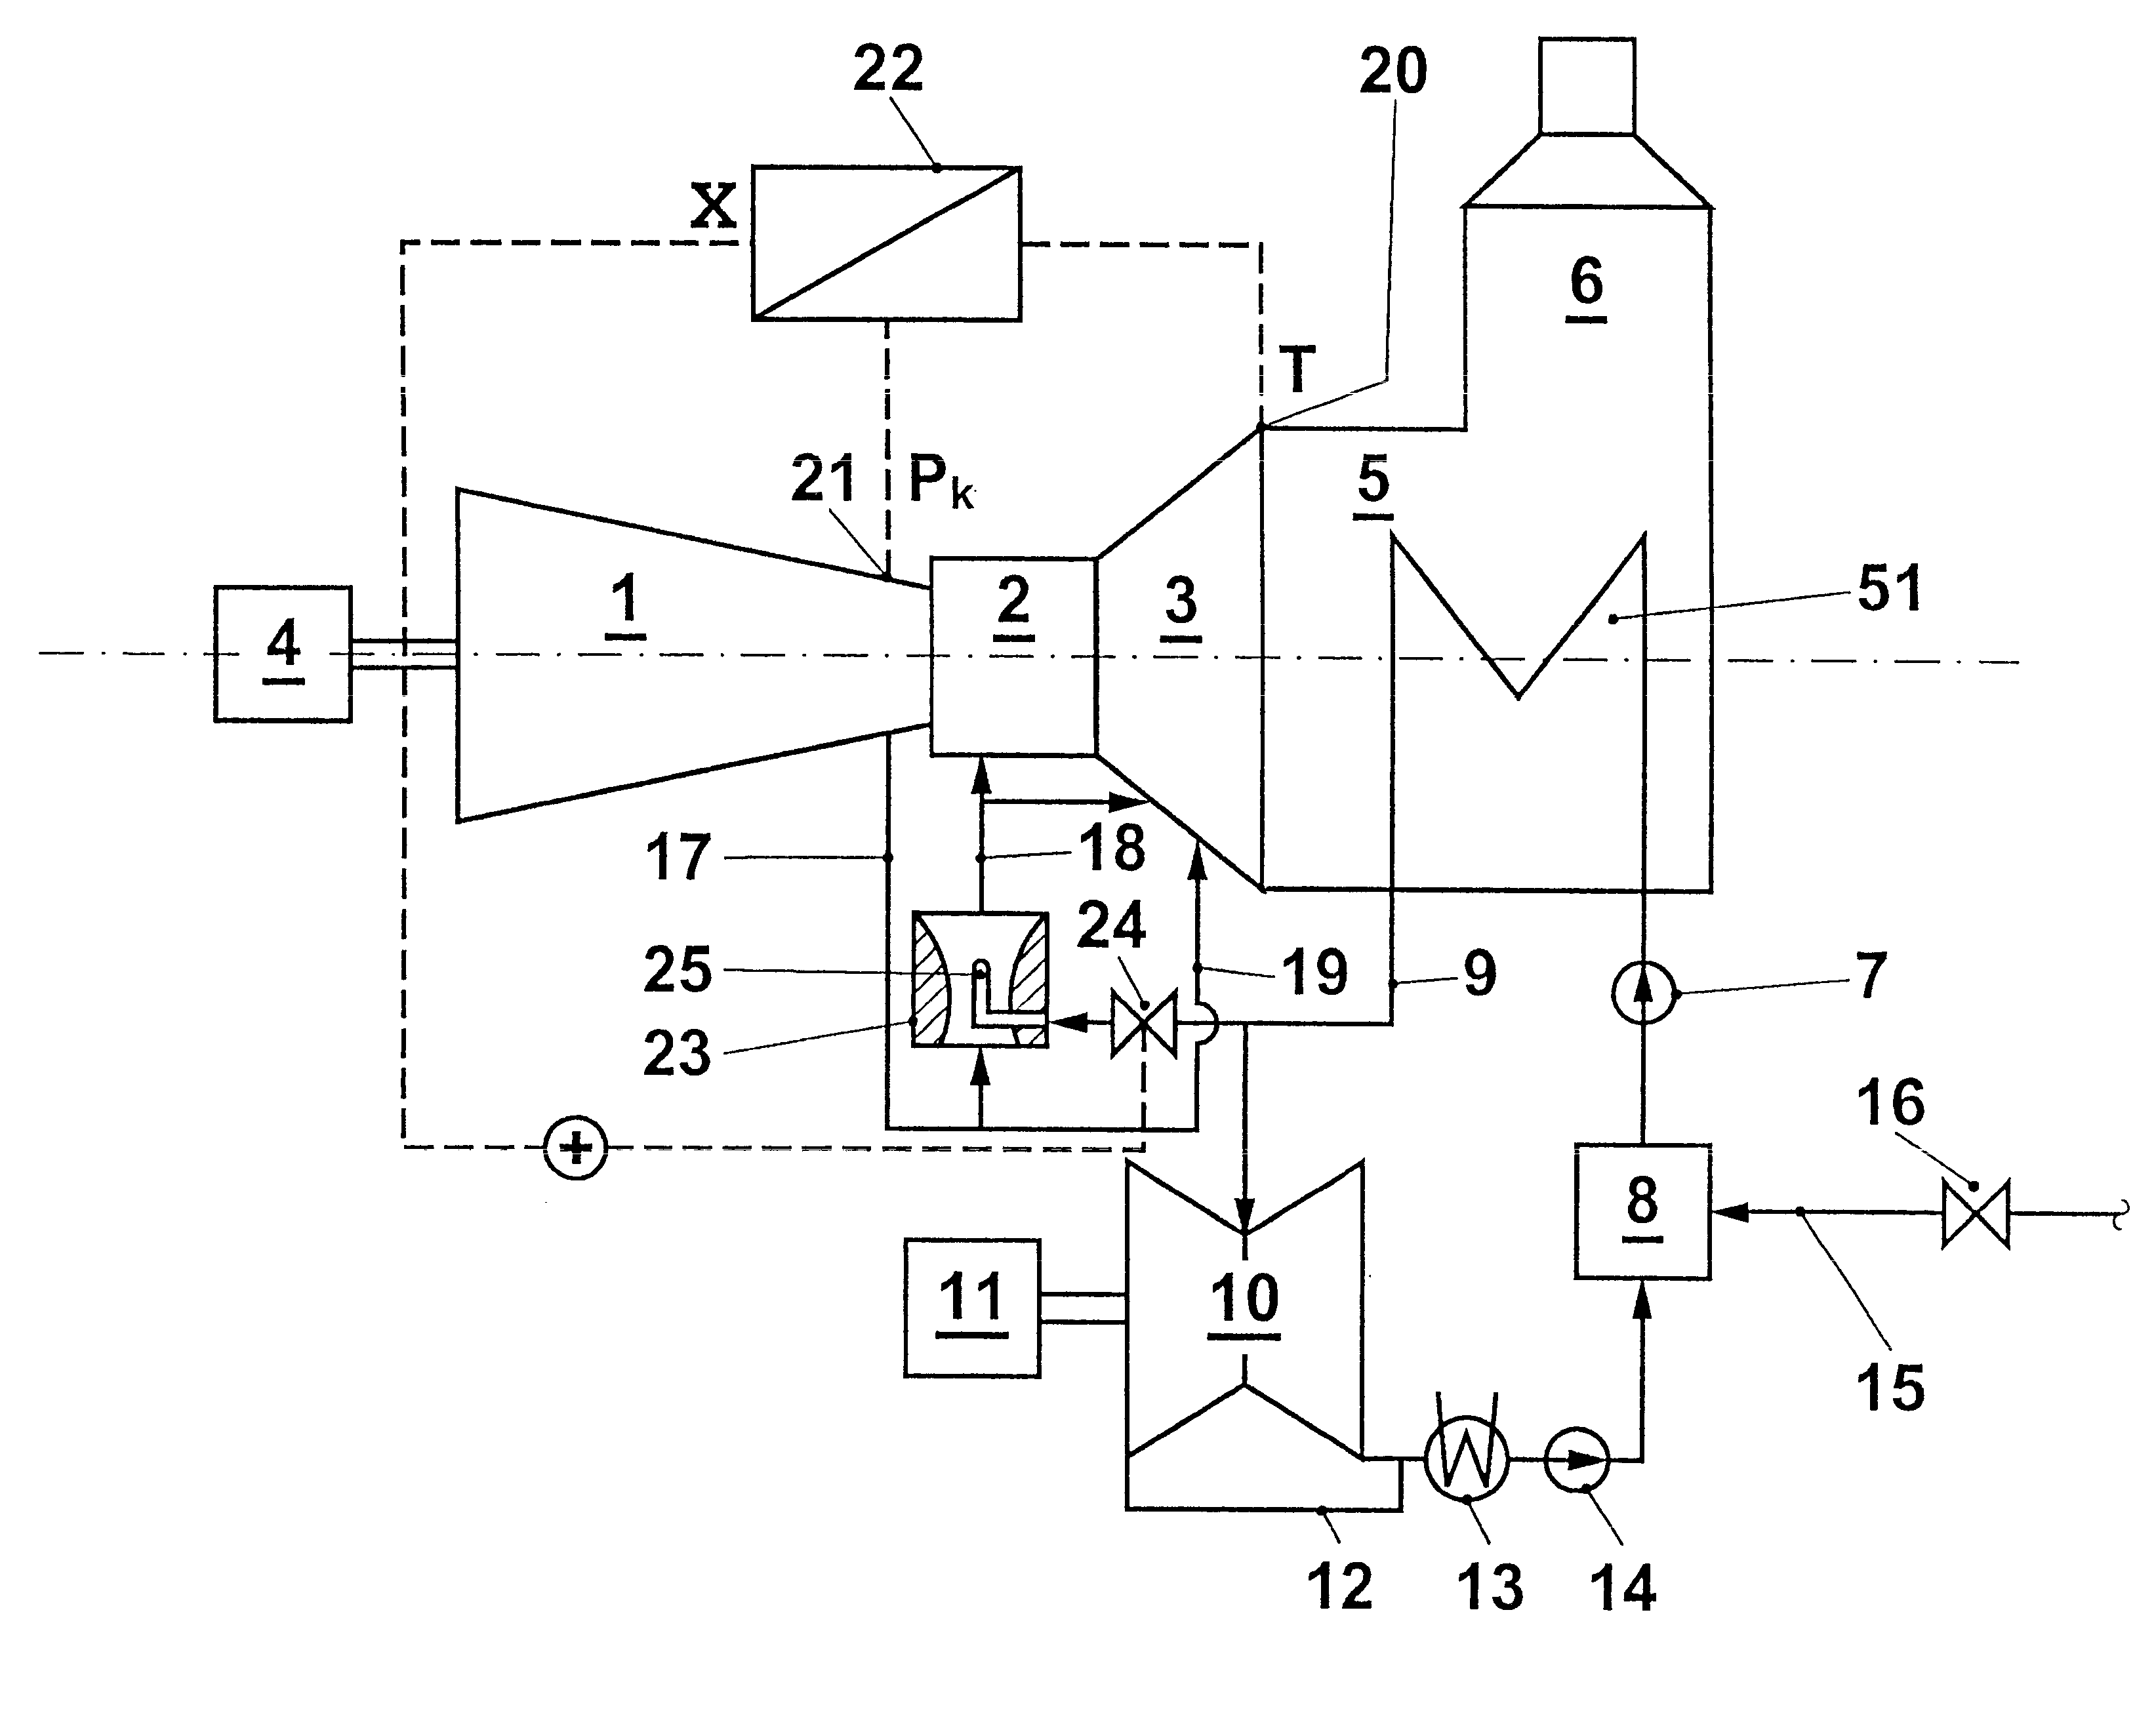 Process for controlling the cooling air mass flow of a gas turbine set